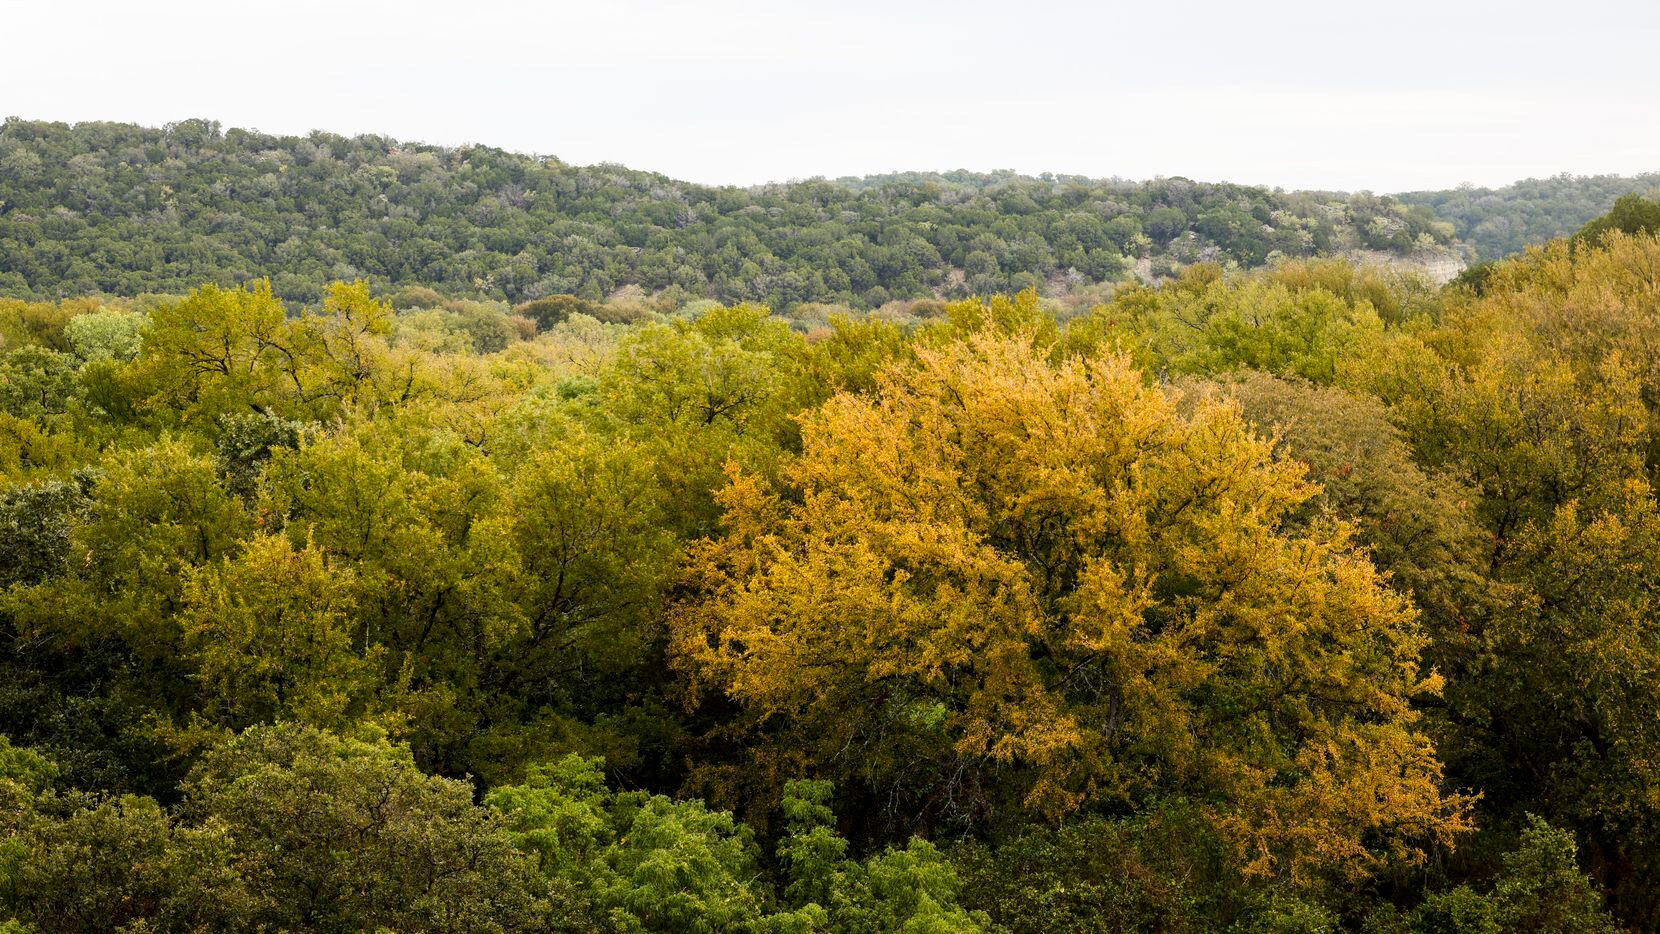 Public-private partnerships are poised to add three jewels to the Texas Parks and Wildlife...